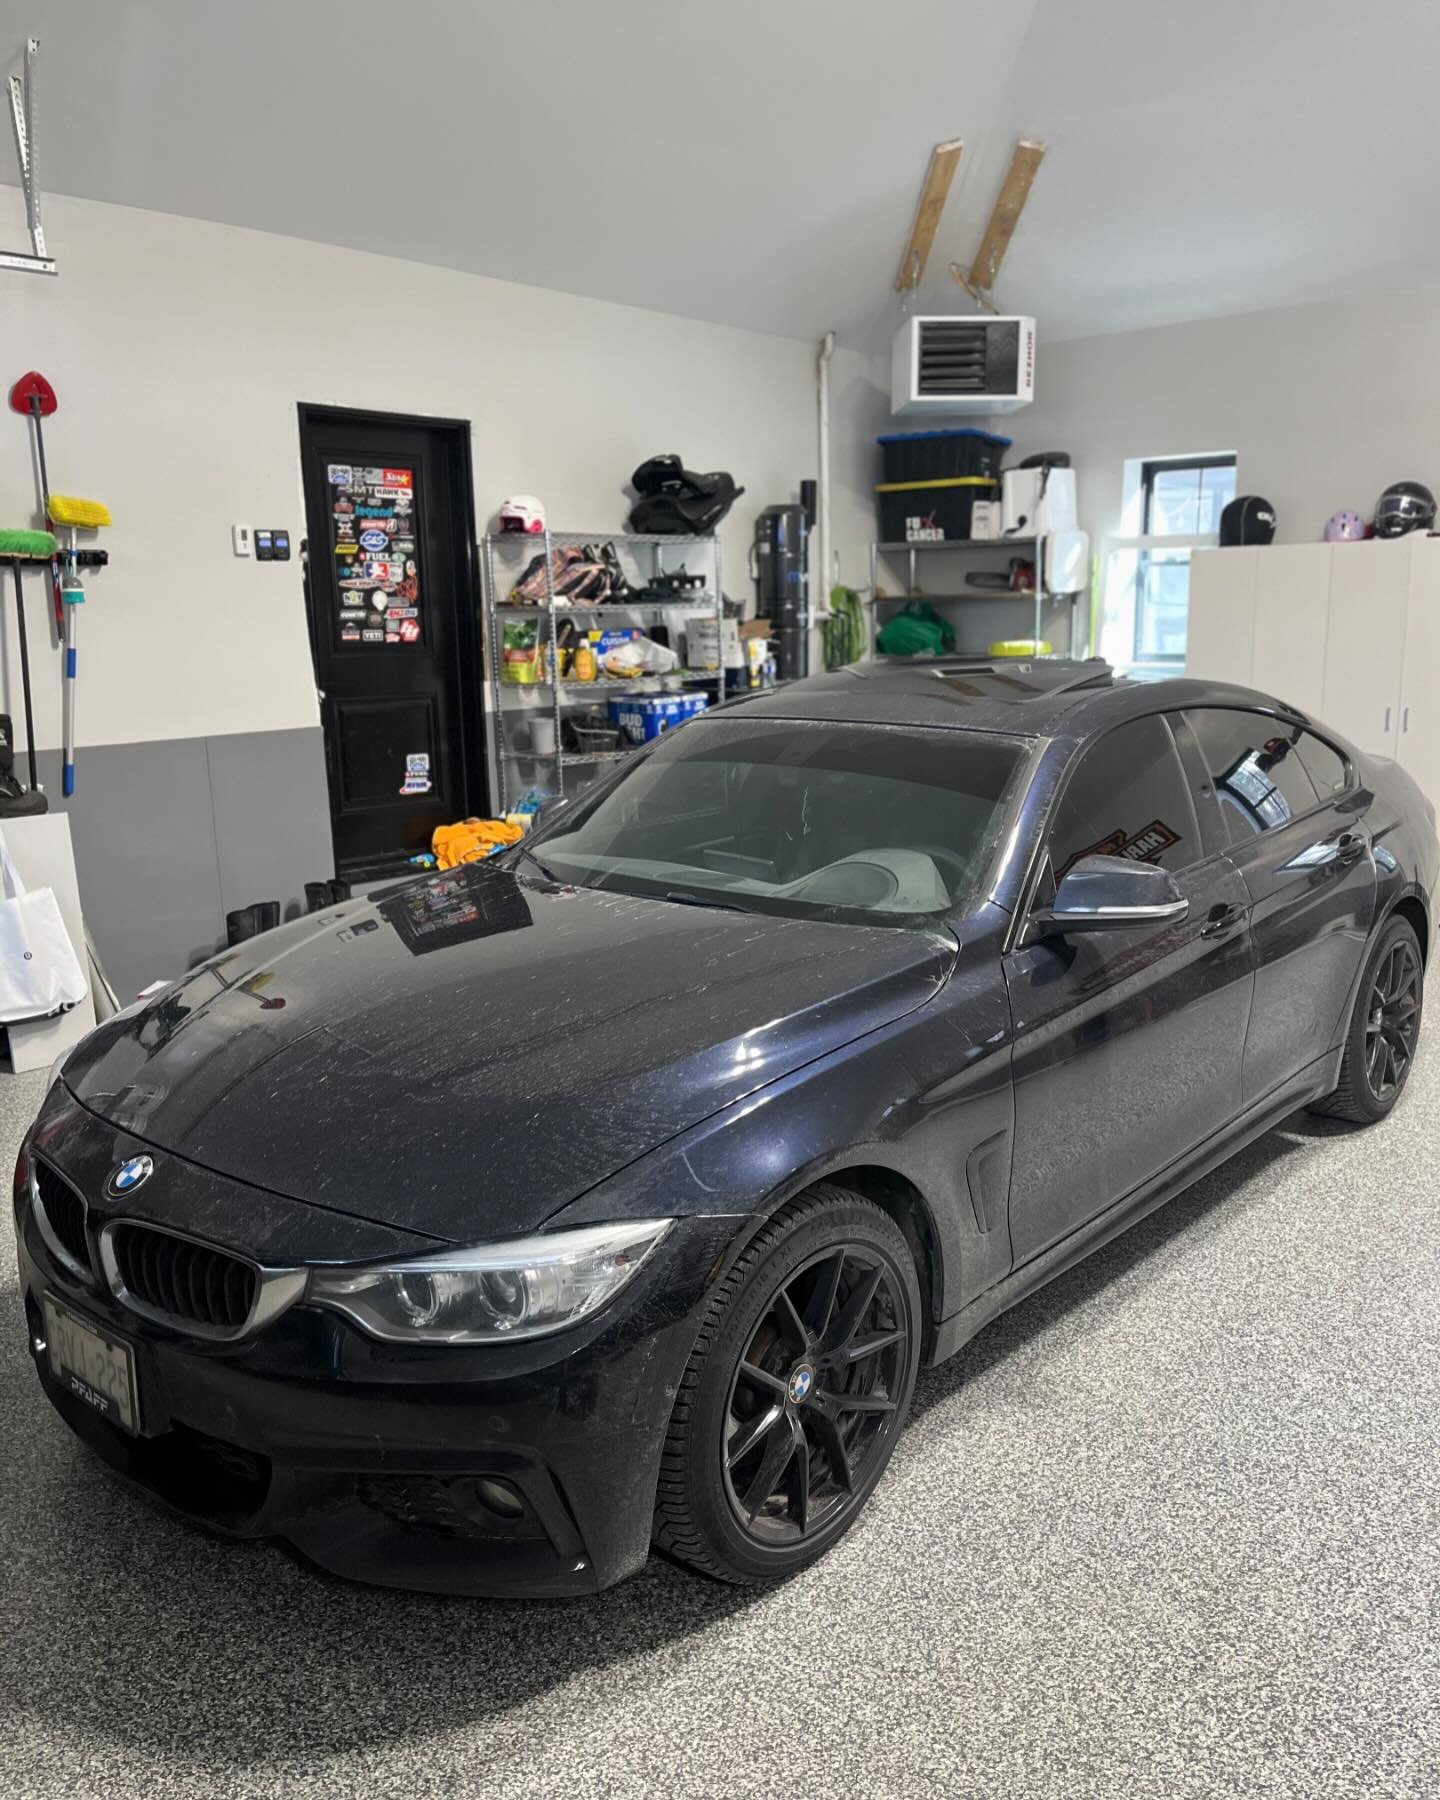 This BMW needed some well deserved love 😅🧼

Full Interior + Clay &amp; Seal treatment got it detailed, decontaminated and protected for months to come ✨

Contact us today and see what we can do for your vehicle! 🚘💫